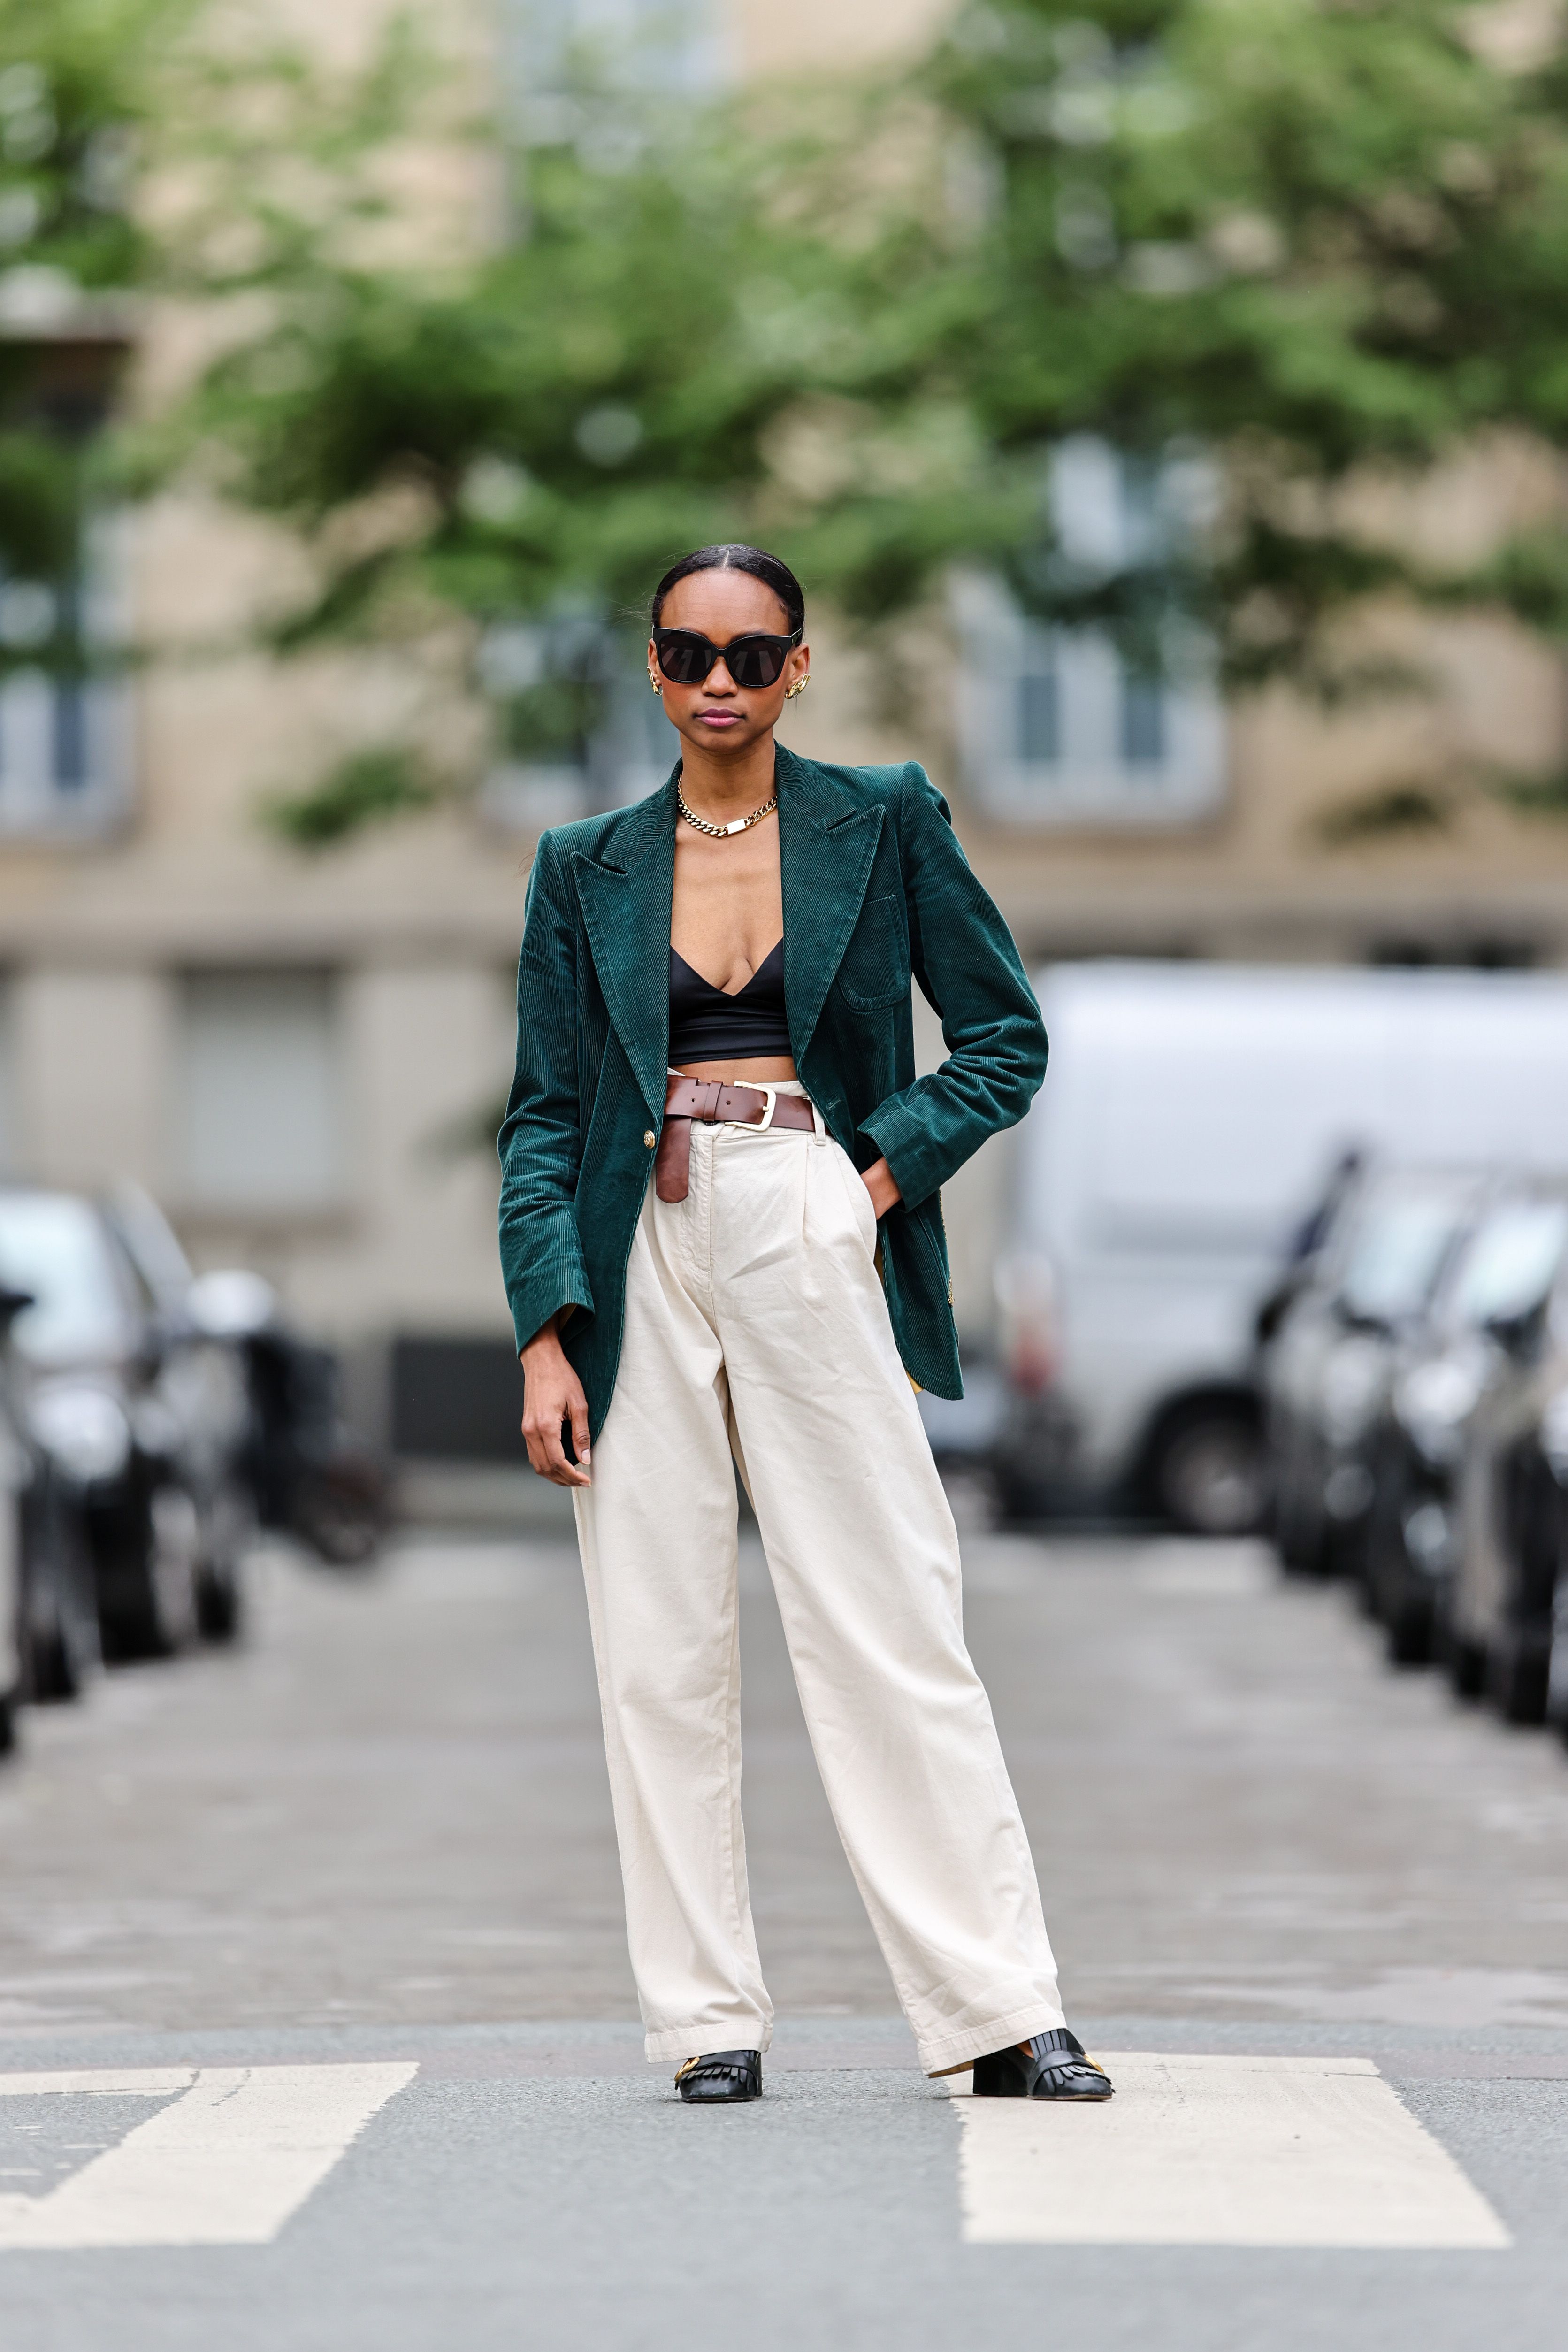 Go Ahead, Wear Your Blazer With Nothing But A Bra Underneath